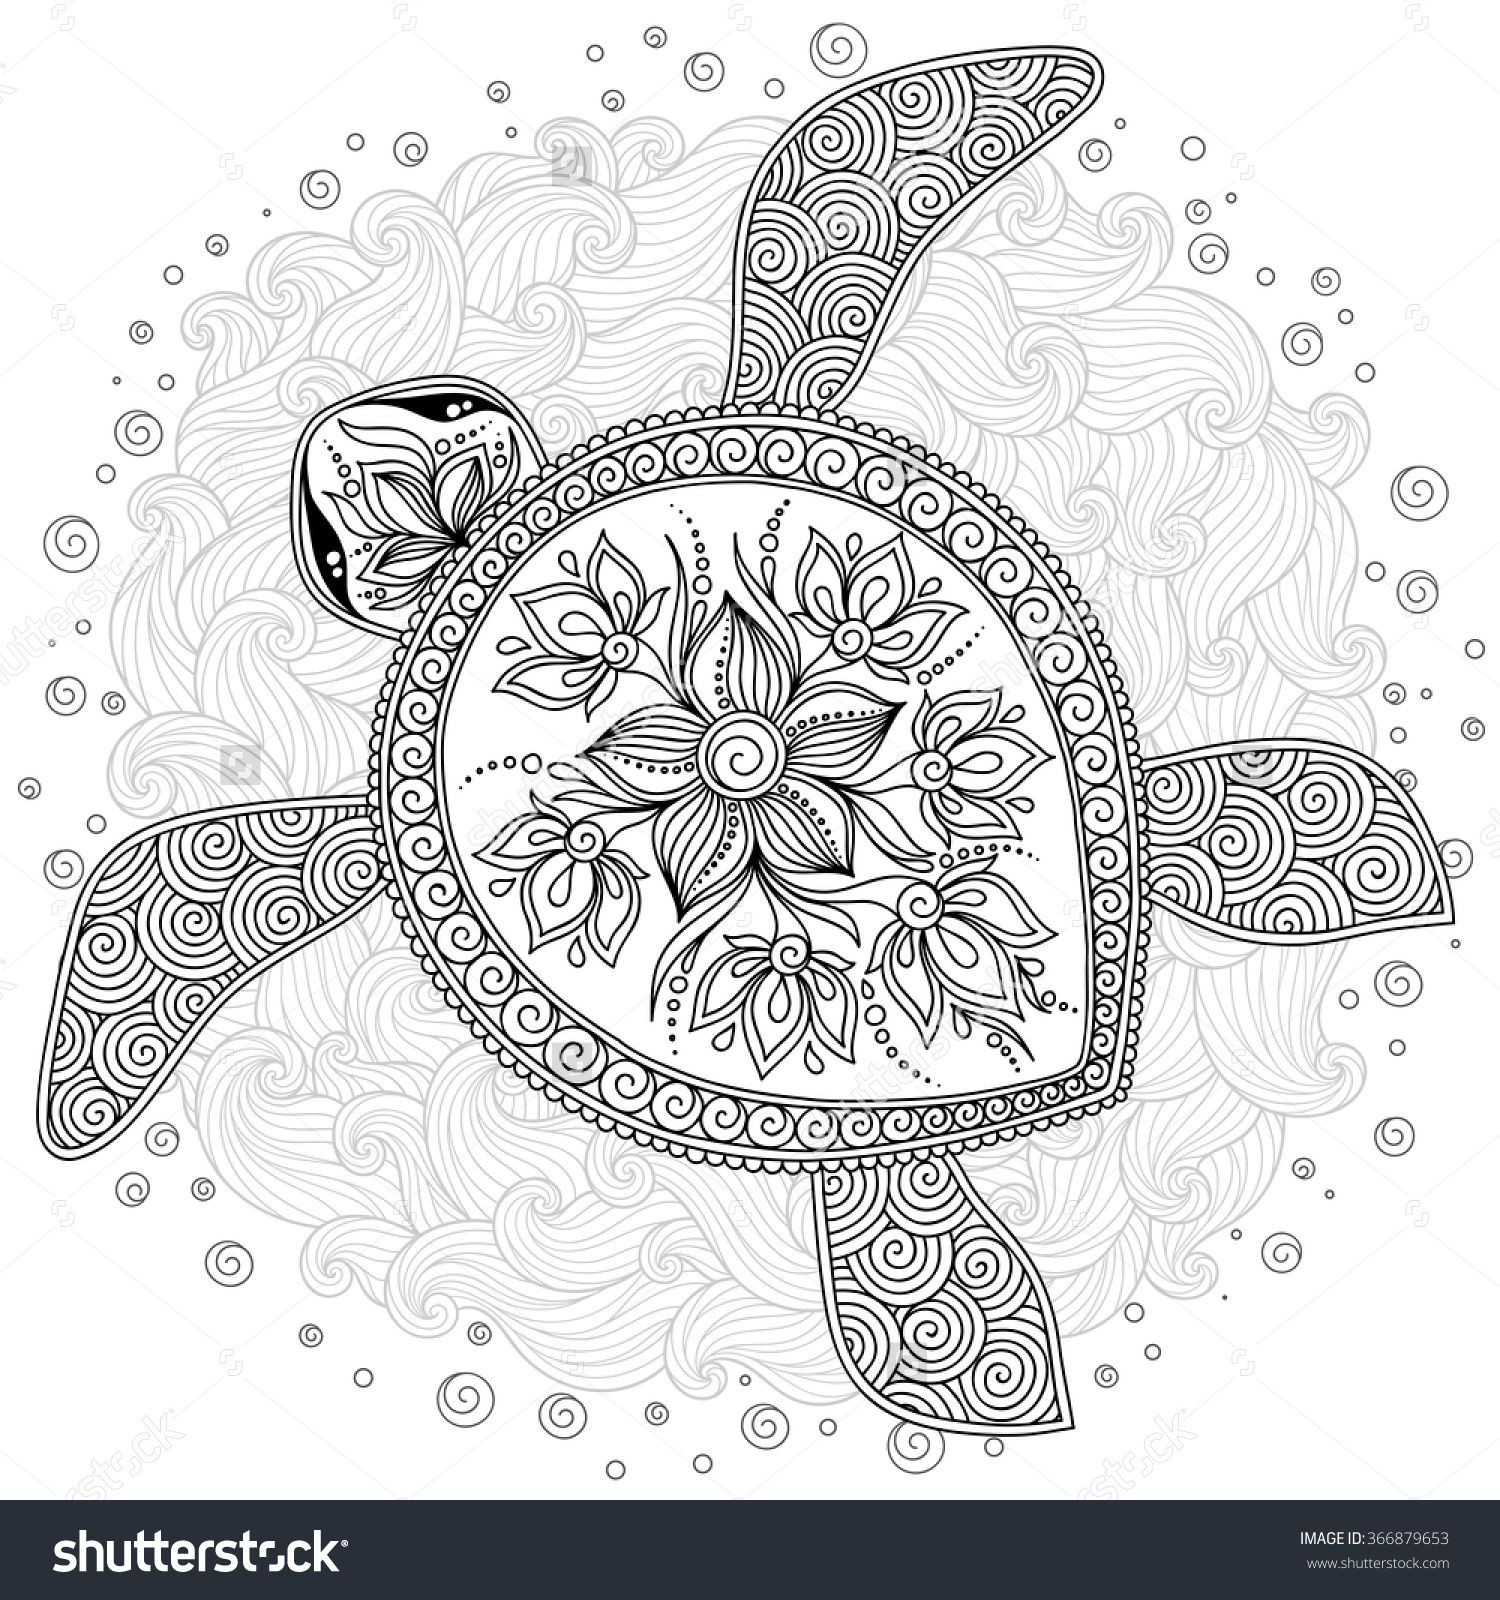 Sea Turtle Coloring Pages For Adults
 Coloring Pages Hand Drawn Sea Turtle Mascot For Adult